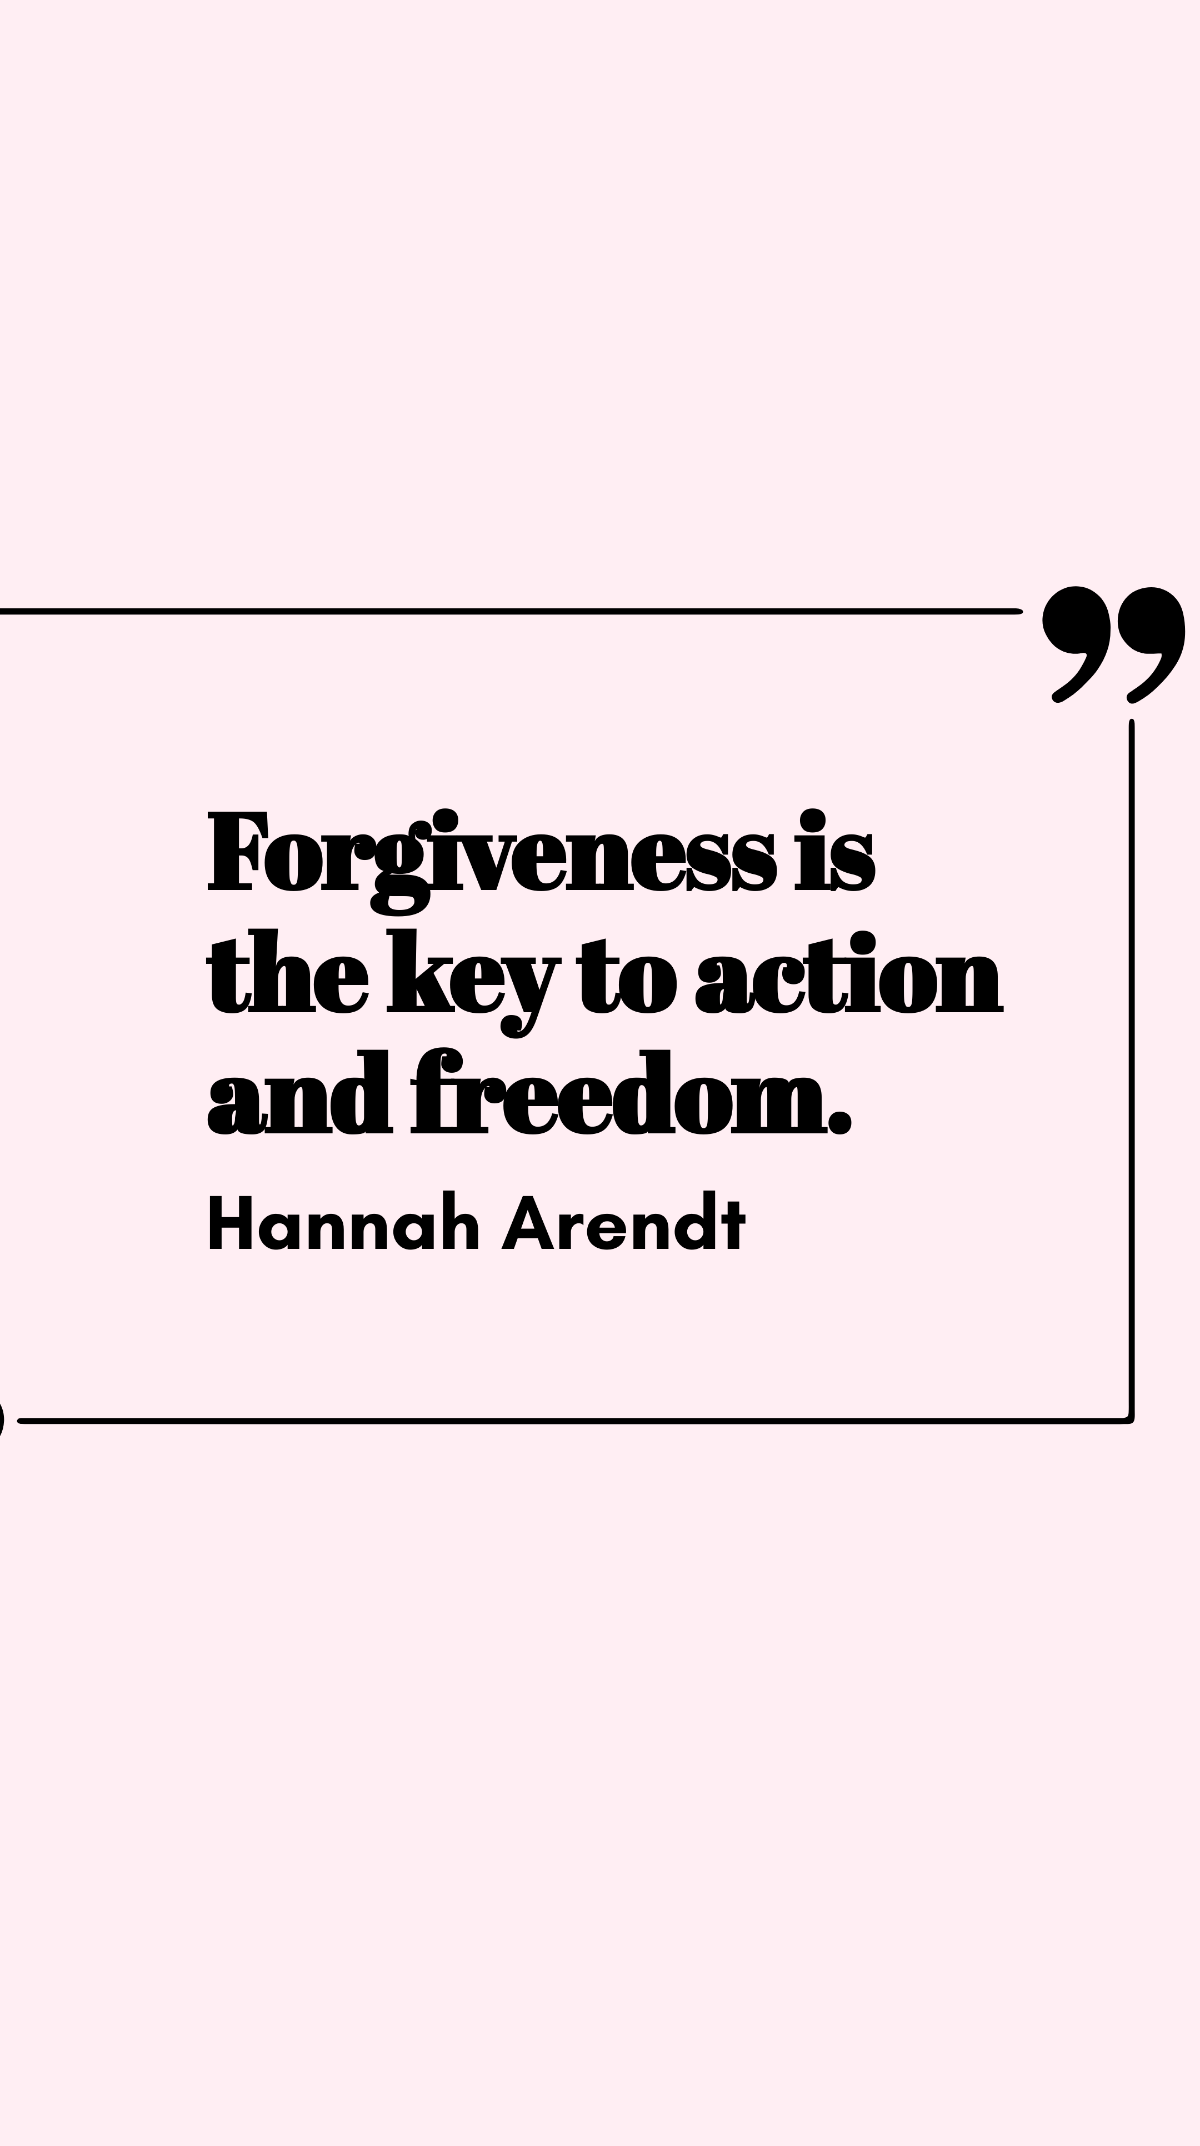 Hannah Arendt - Forgiveness is the key to action and freedom.